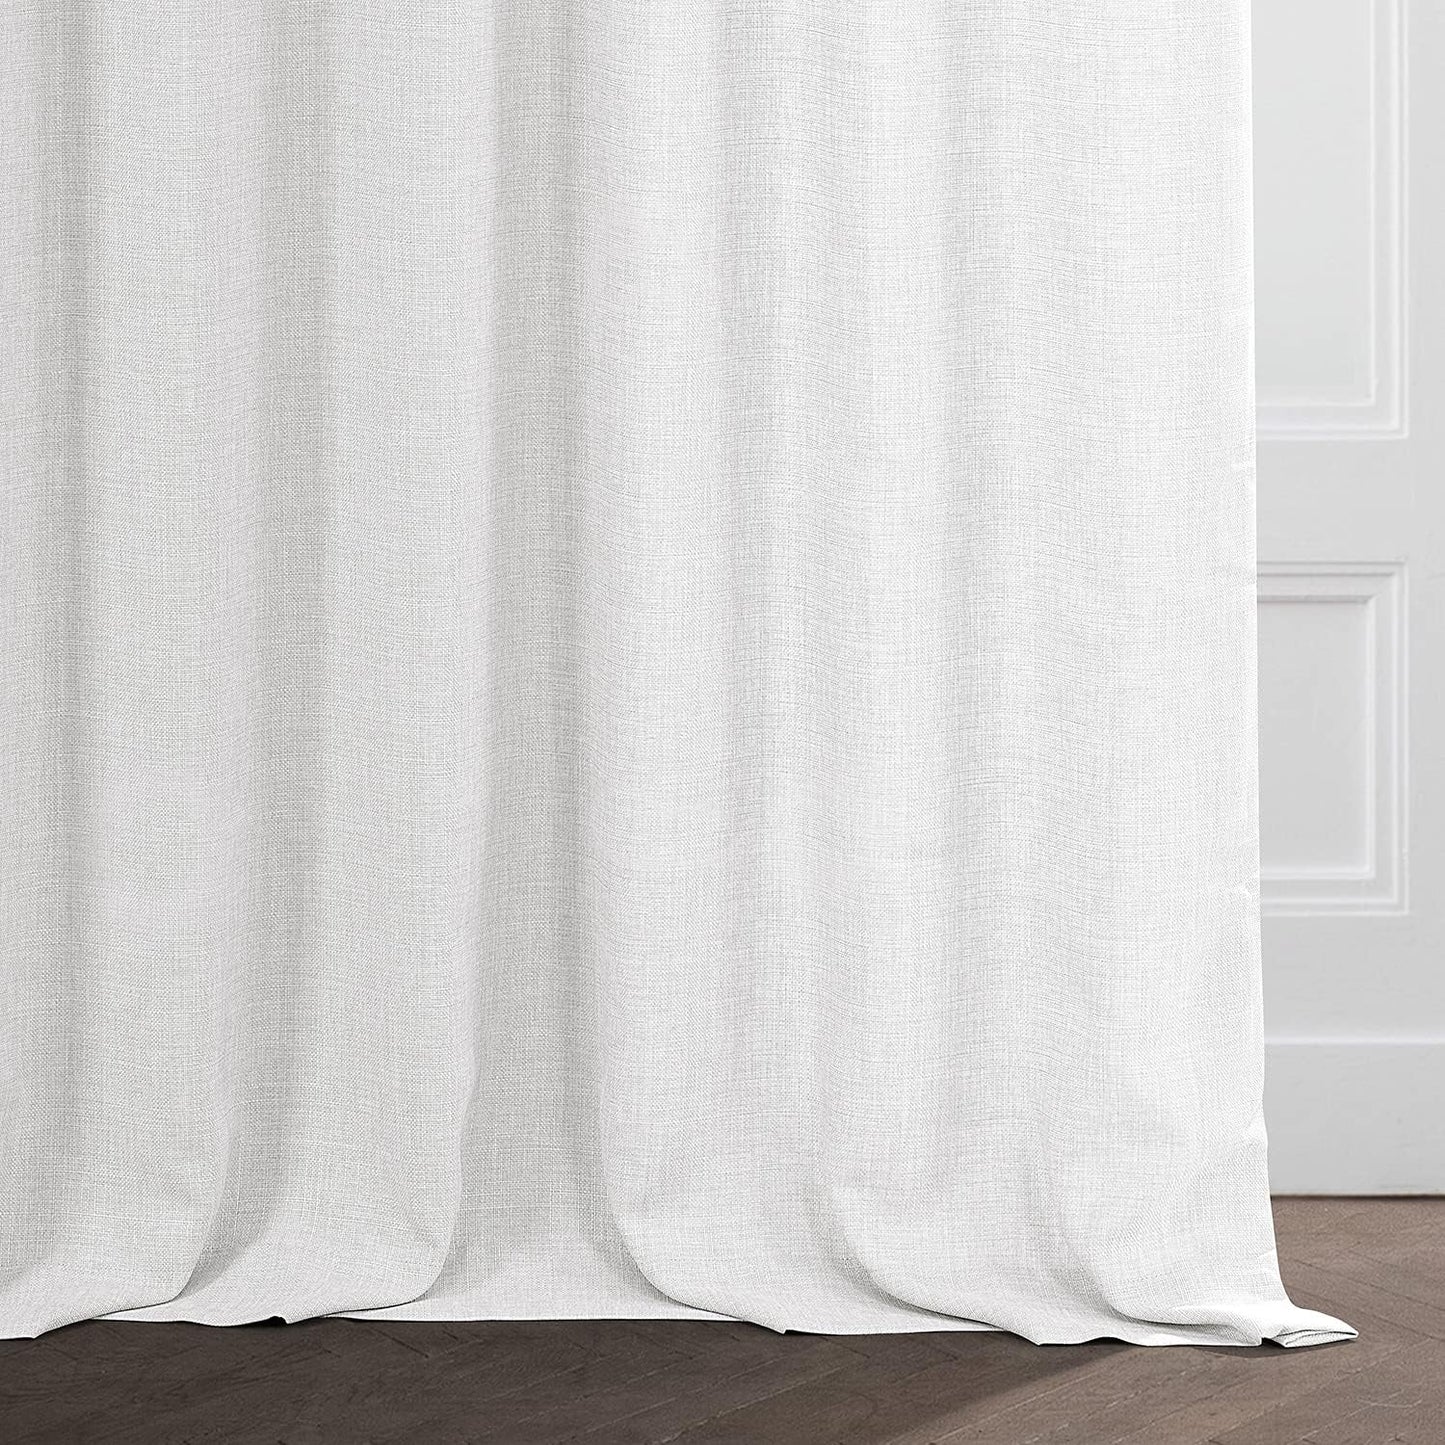 HPD HALF PRICE DRAPES Italian Linen Curtains for Bedroom & Living Room 84 Inches Long Room Darkening Curtains (1 Panel), 50W X 84L, Magnolia off White  Exclusive Fabrics & Furnishings   